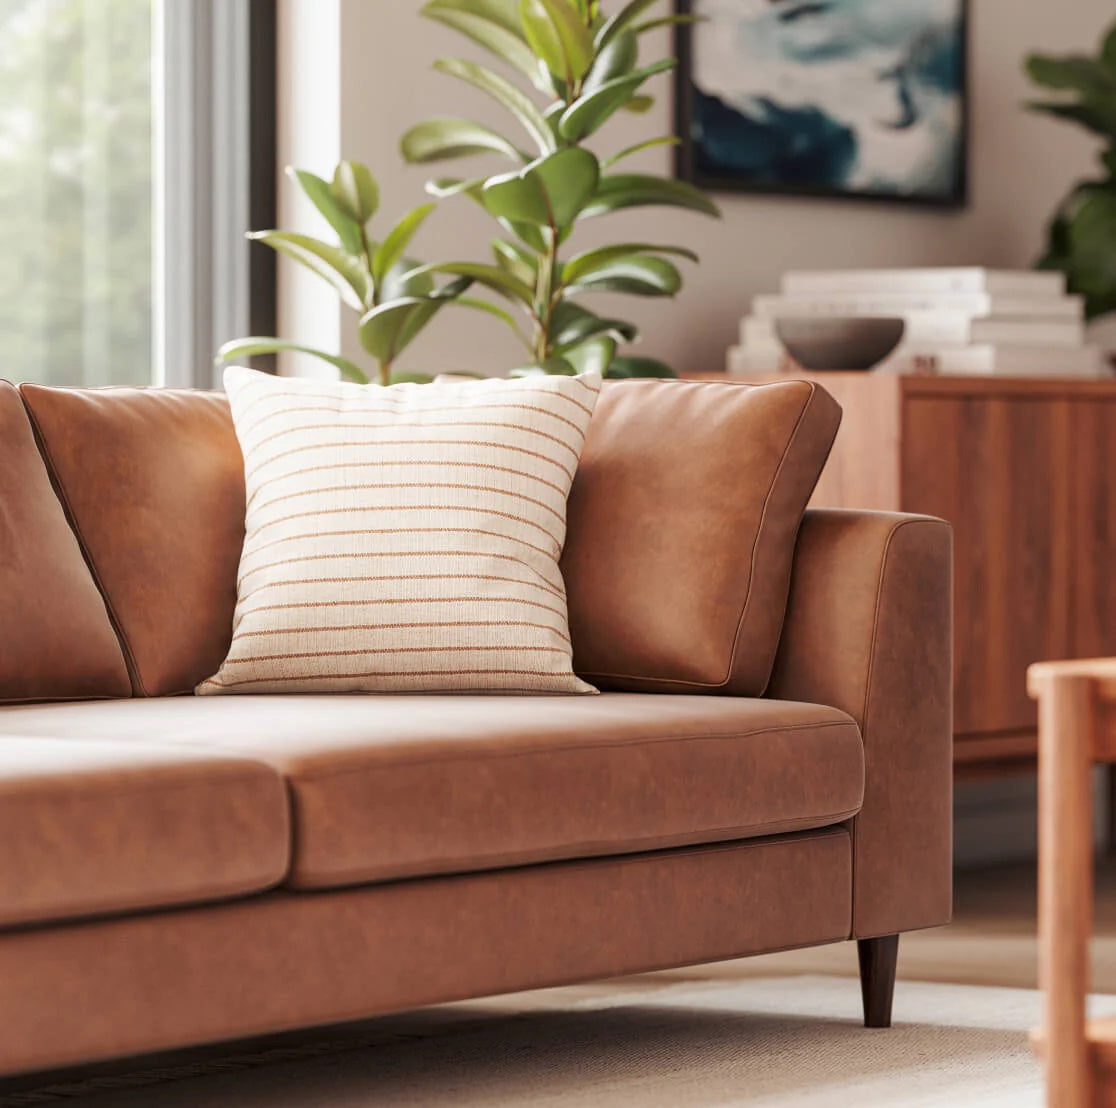 A modern living room features a brown leather sofa with a white and brown striped pillow. A potted plant sits beside the sofa, and a framed abstract artwork hangs on the wall. A wooden cabinet with books adds a cozy touch to the space.